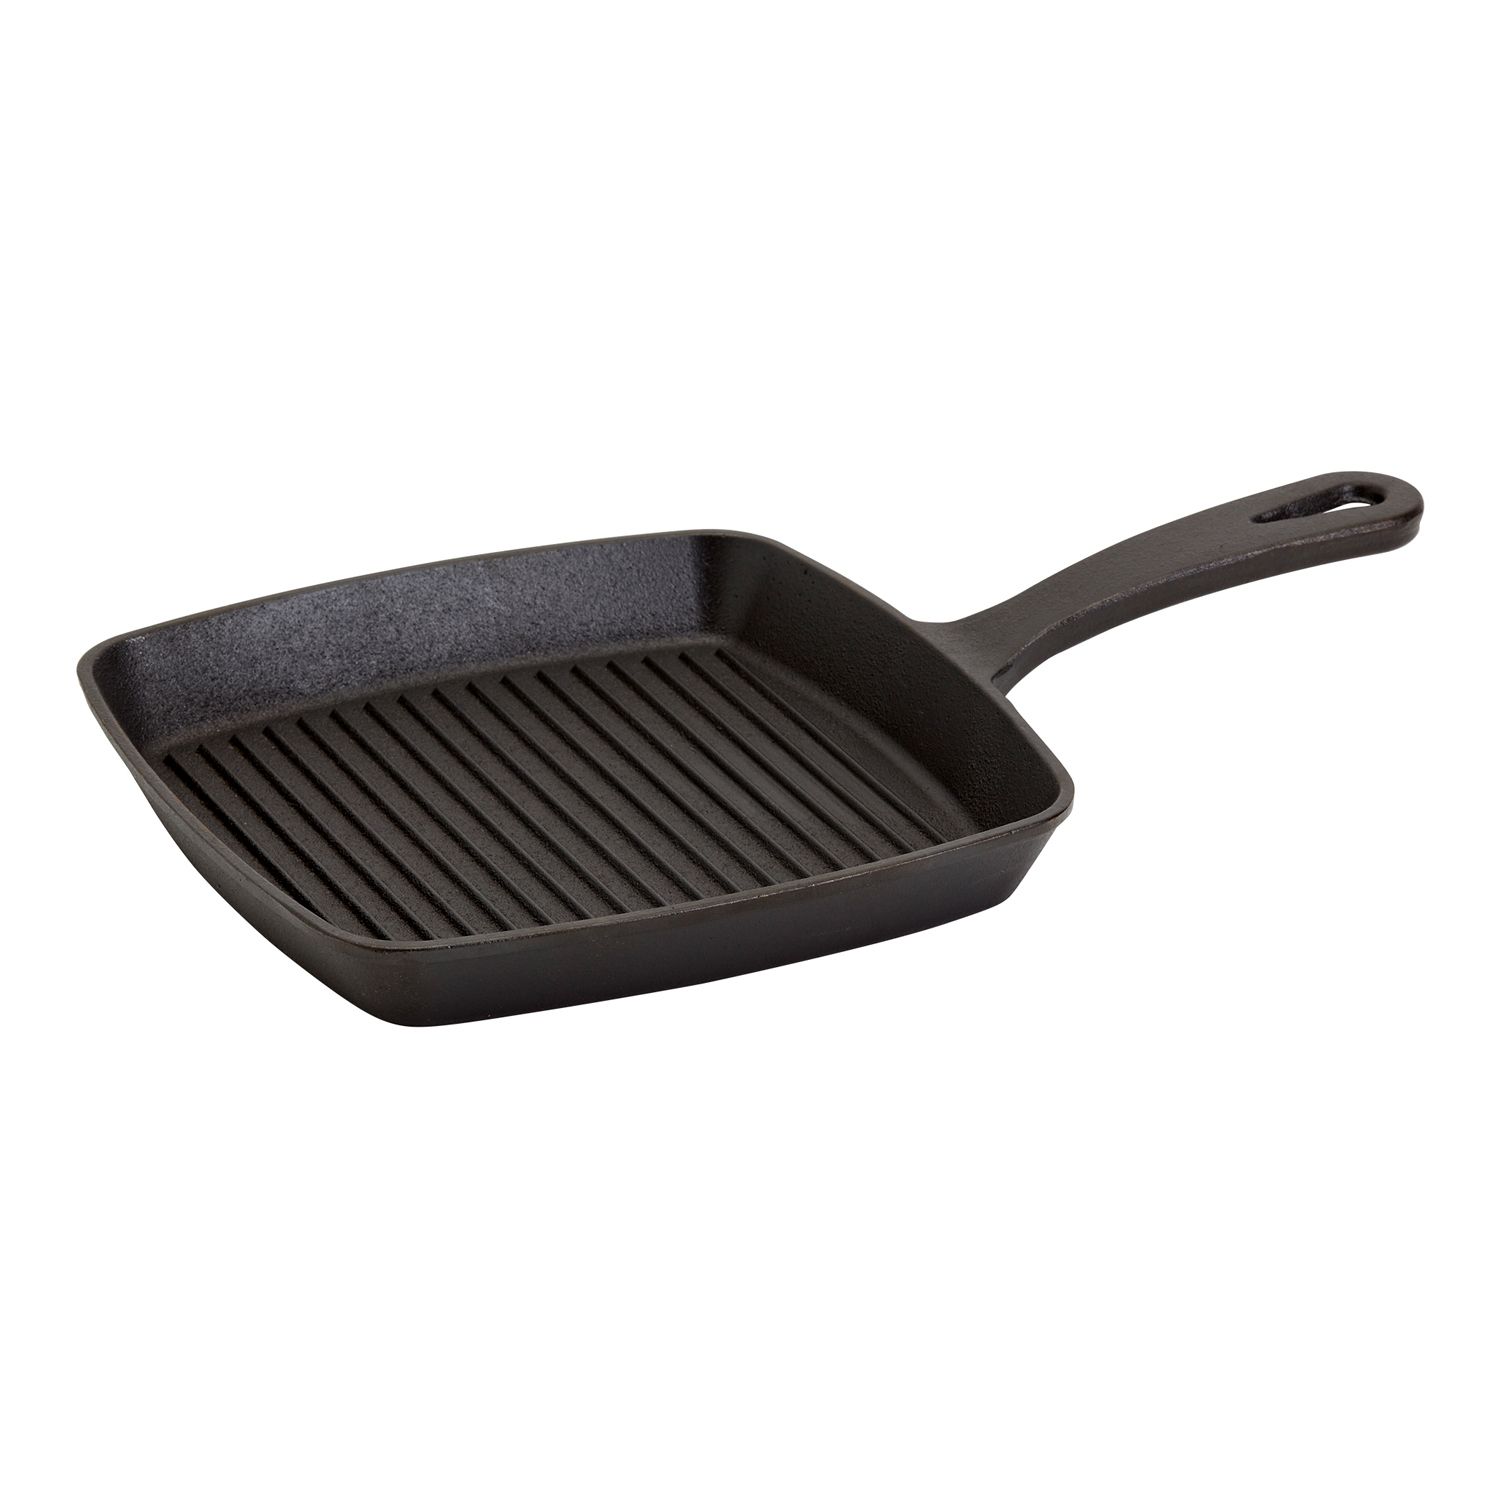 MegaChef 14 Inch Square Enamel Cast Iron Grill Pan in Red with